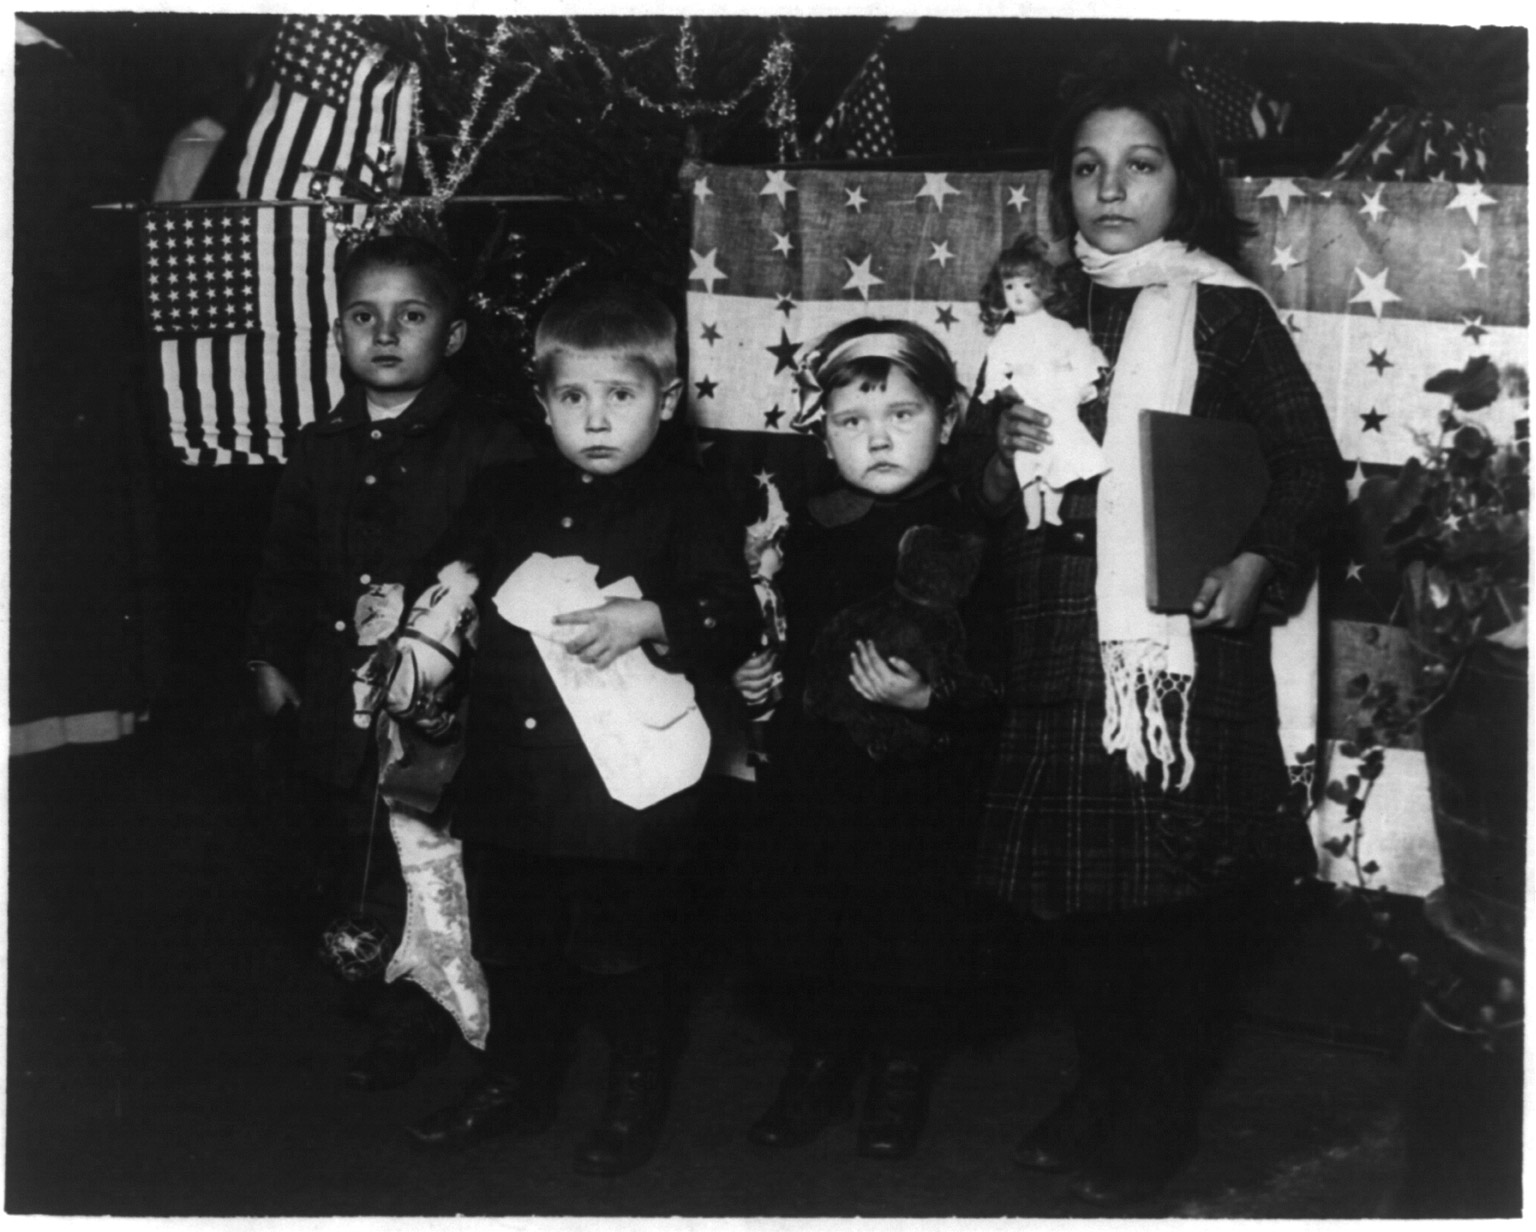 Four immigrant children posed for their first Christmas in America at Ellis Island, circa 1918.